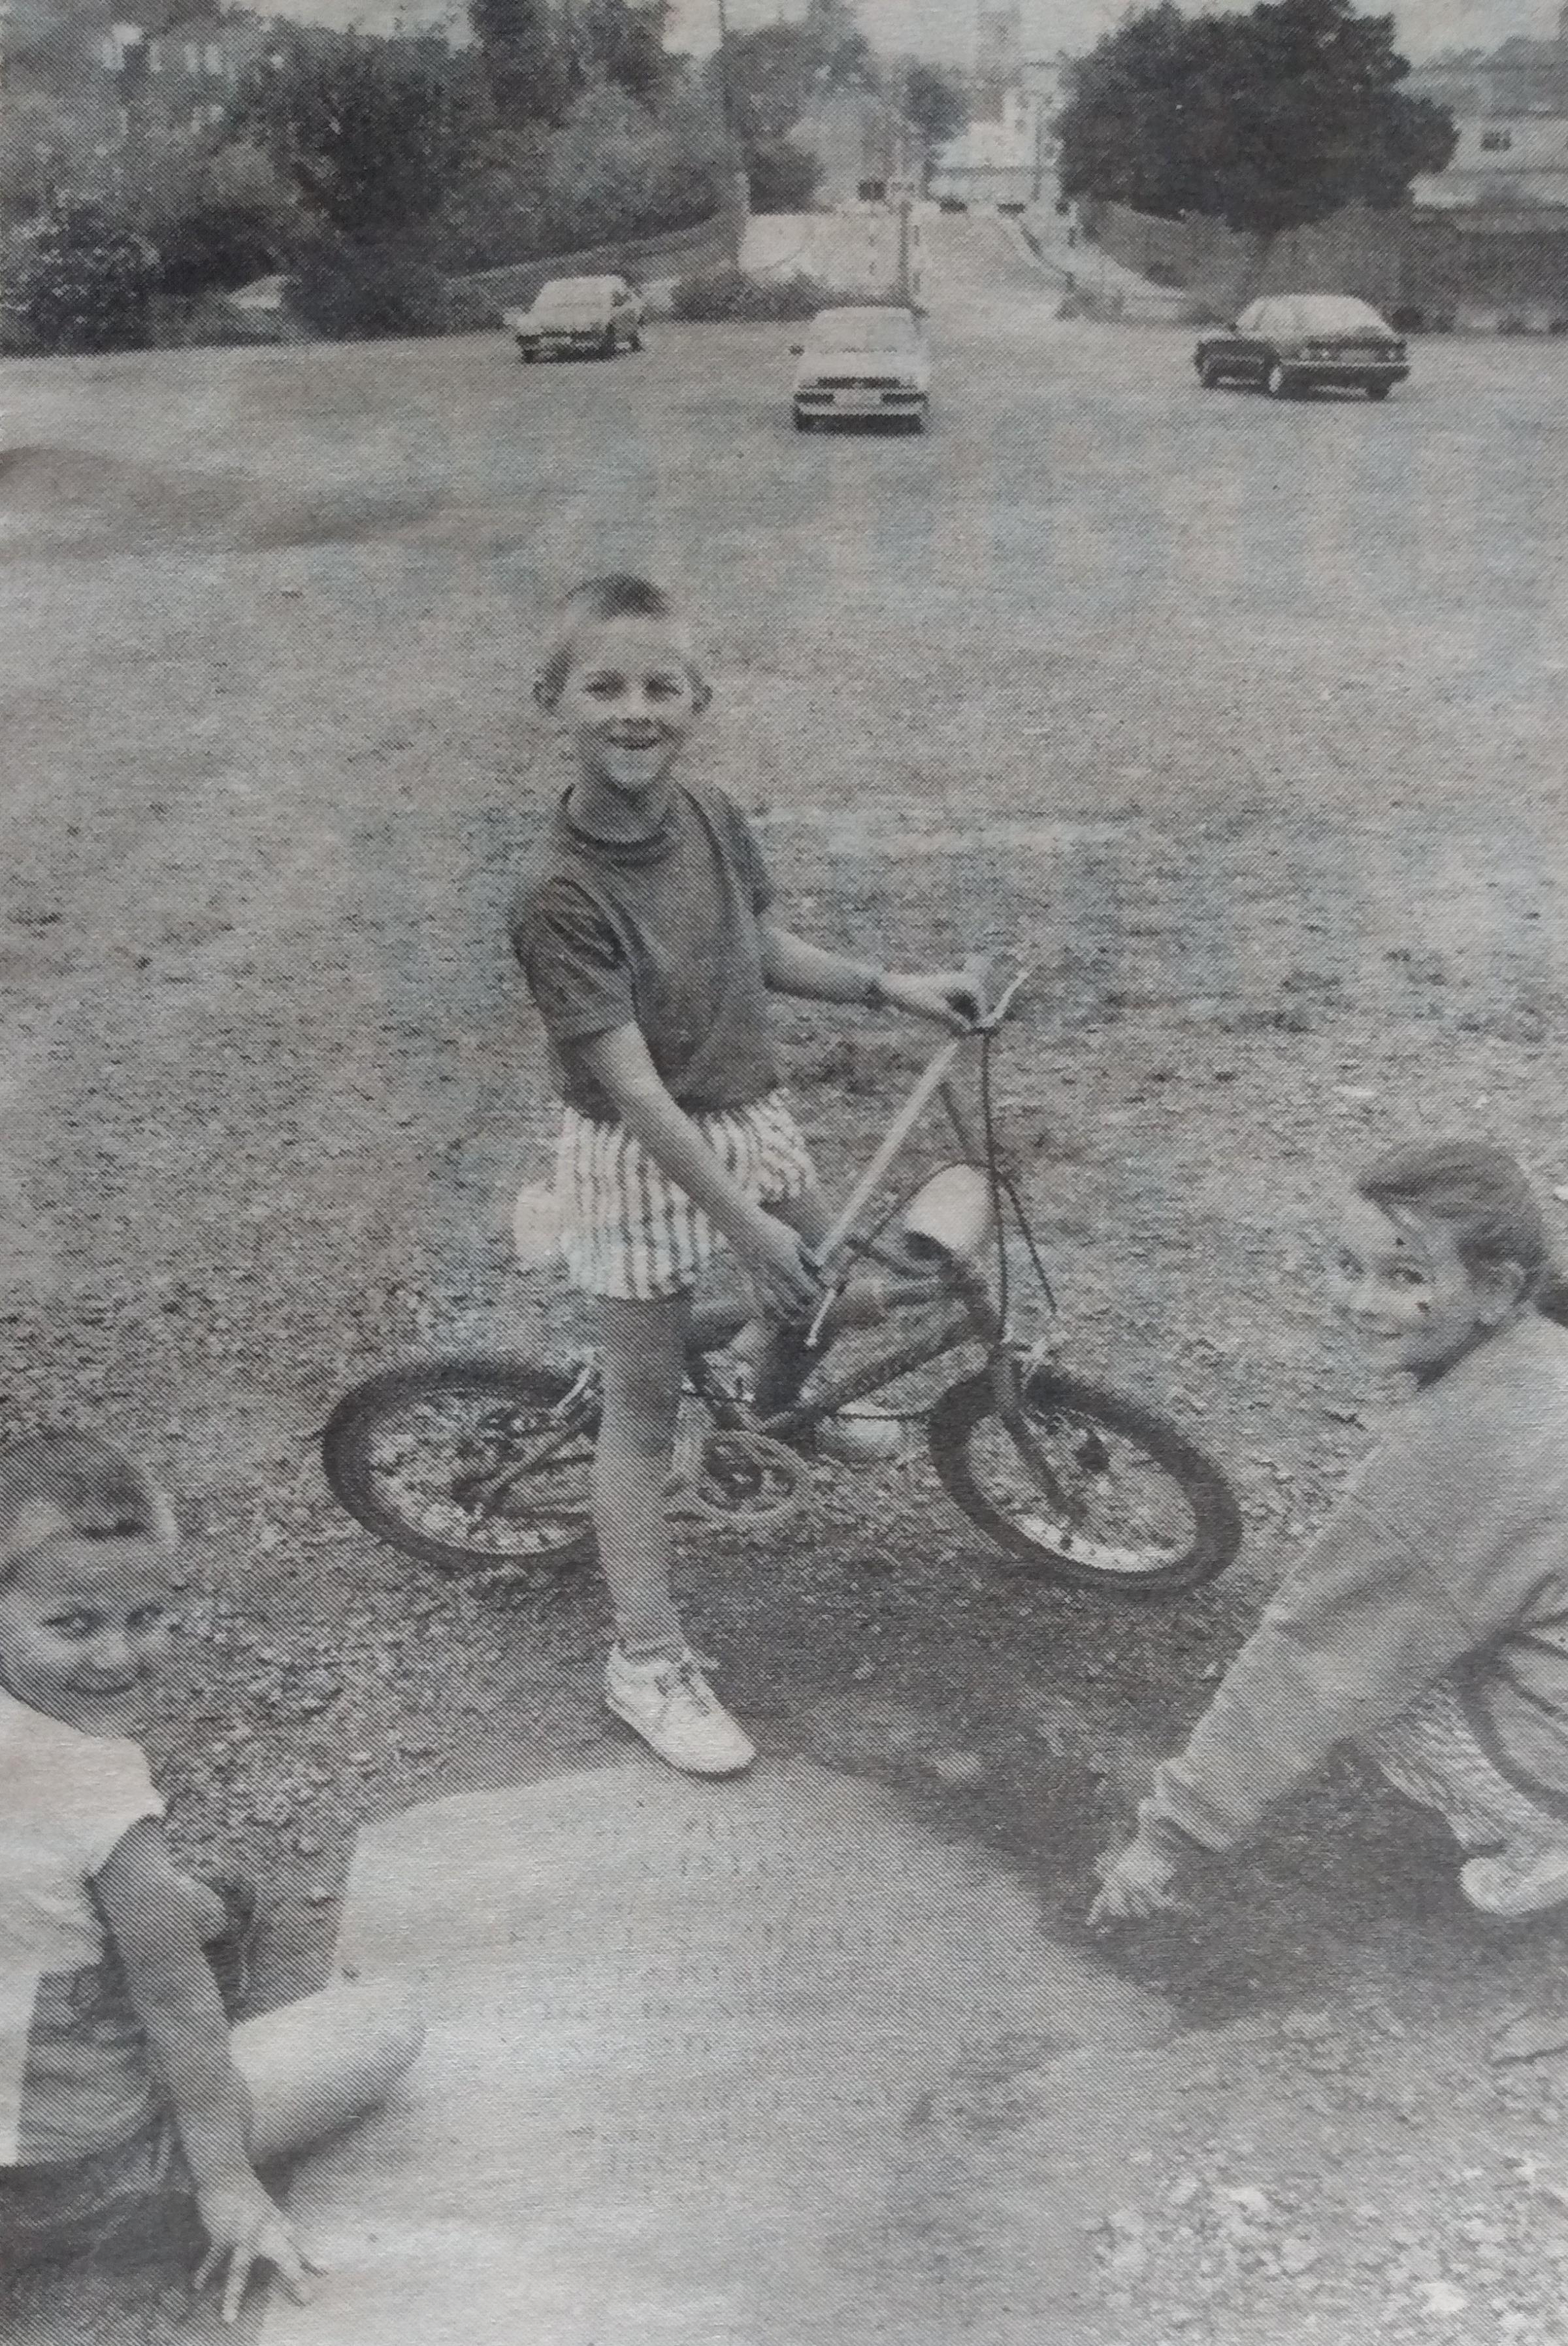 A rather sombre discovery was made by the Clark family children, Stuart, aged five, Andrew, six and Kimberley, nine, who uncovered a gravestone while playing in Tallow Hill car park in June 1990. The gravestone’s inscription read “Abigail,